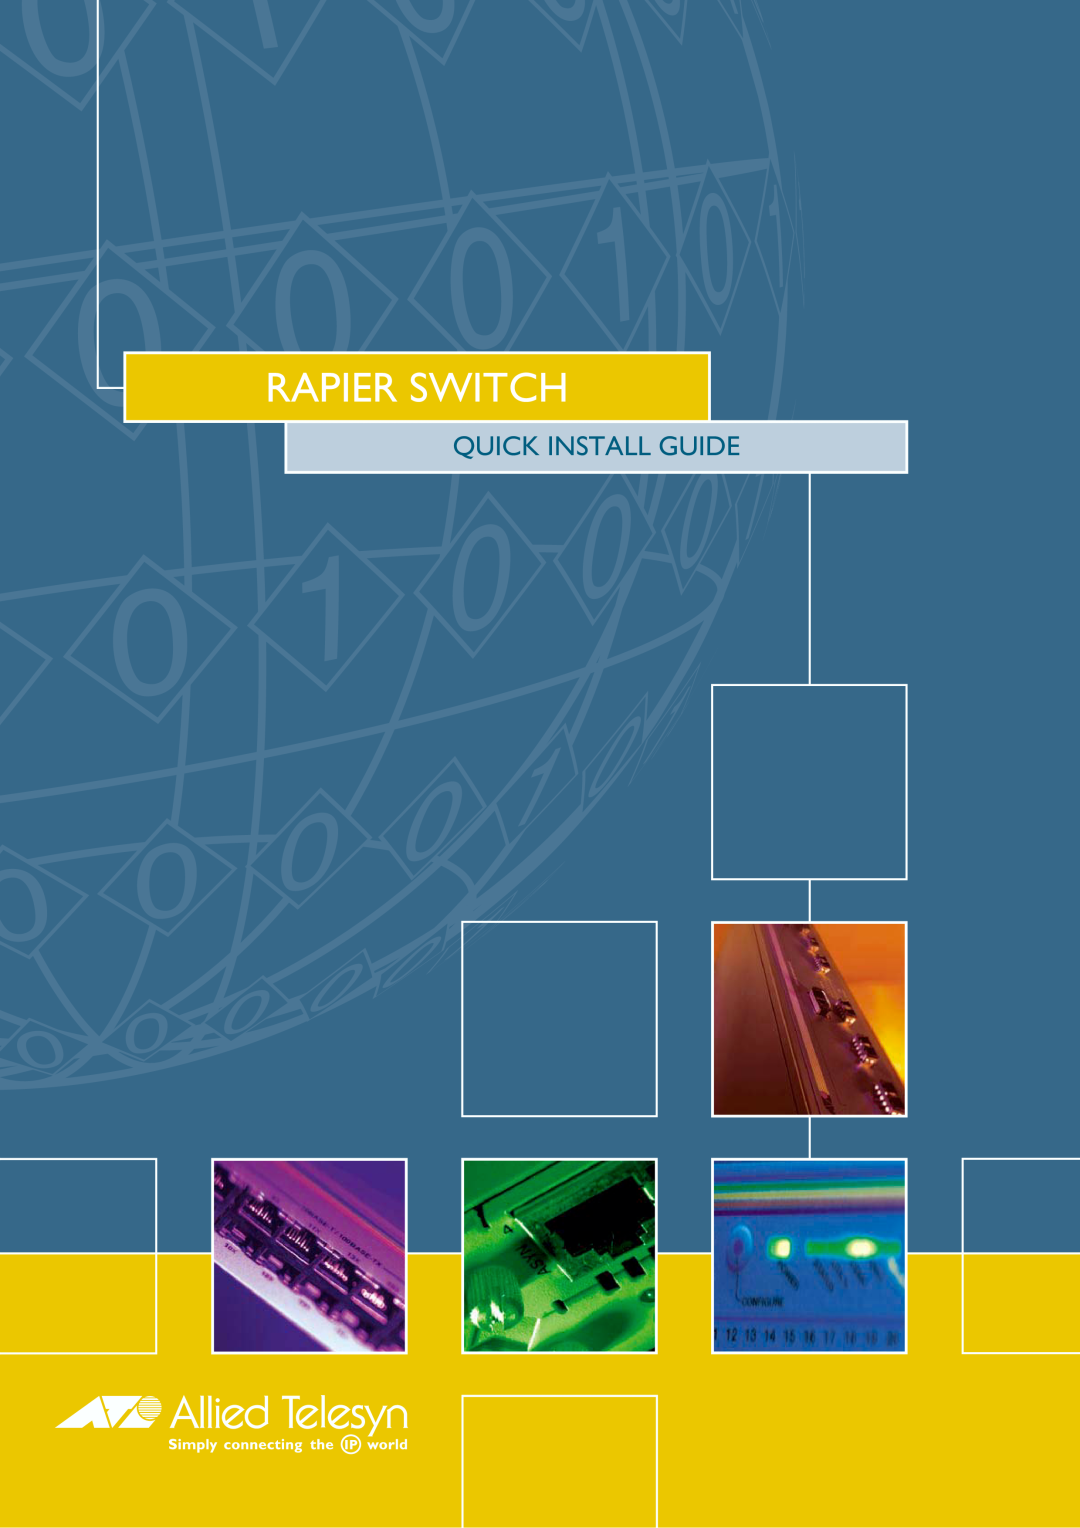 Allied Telesis Rapier Switch manual Quick Install Guide 